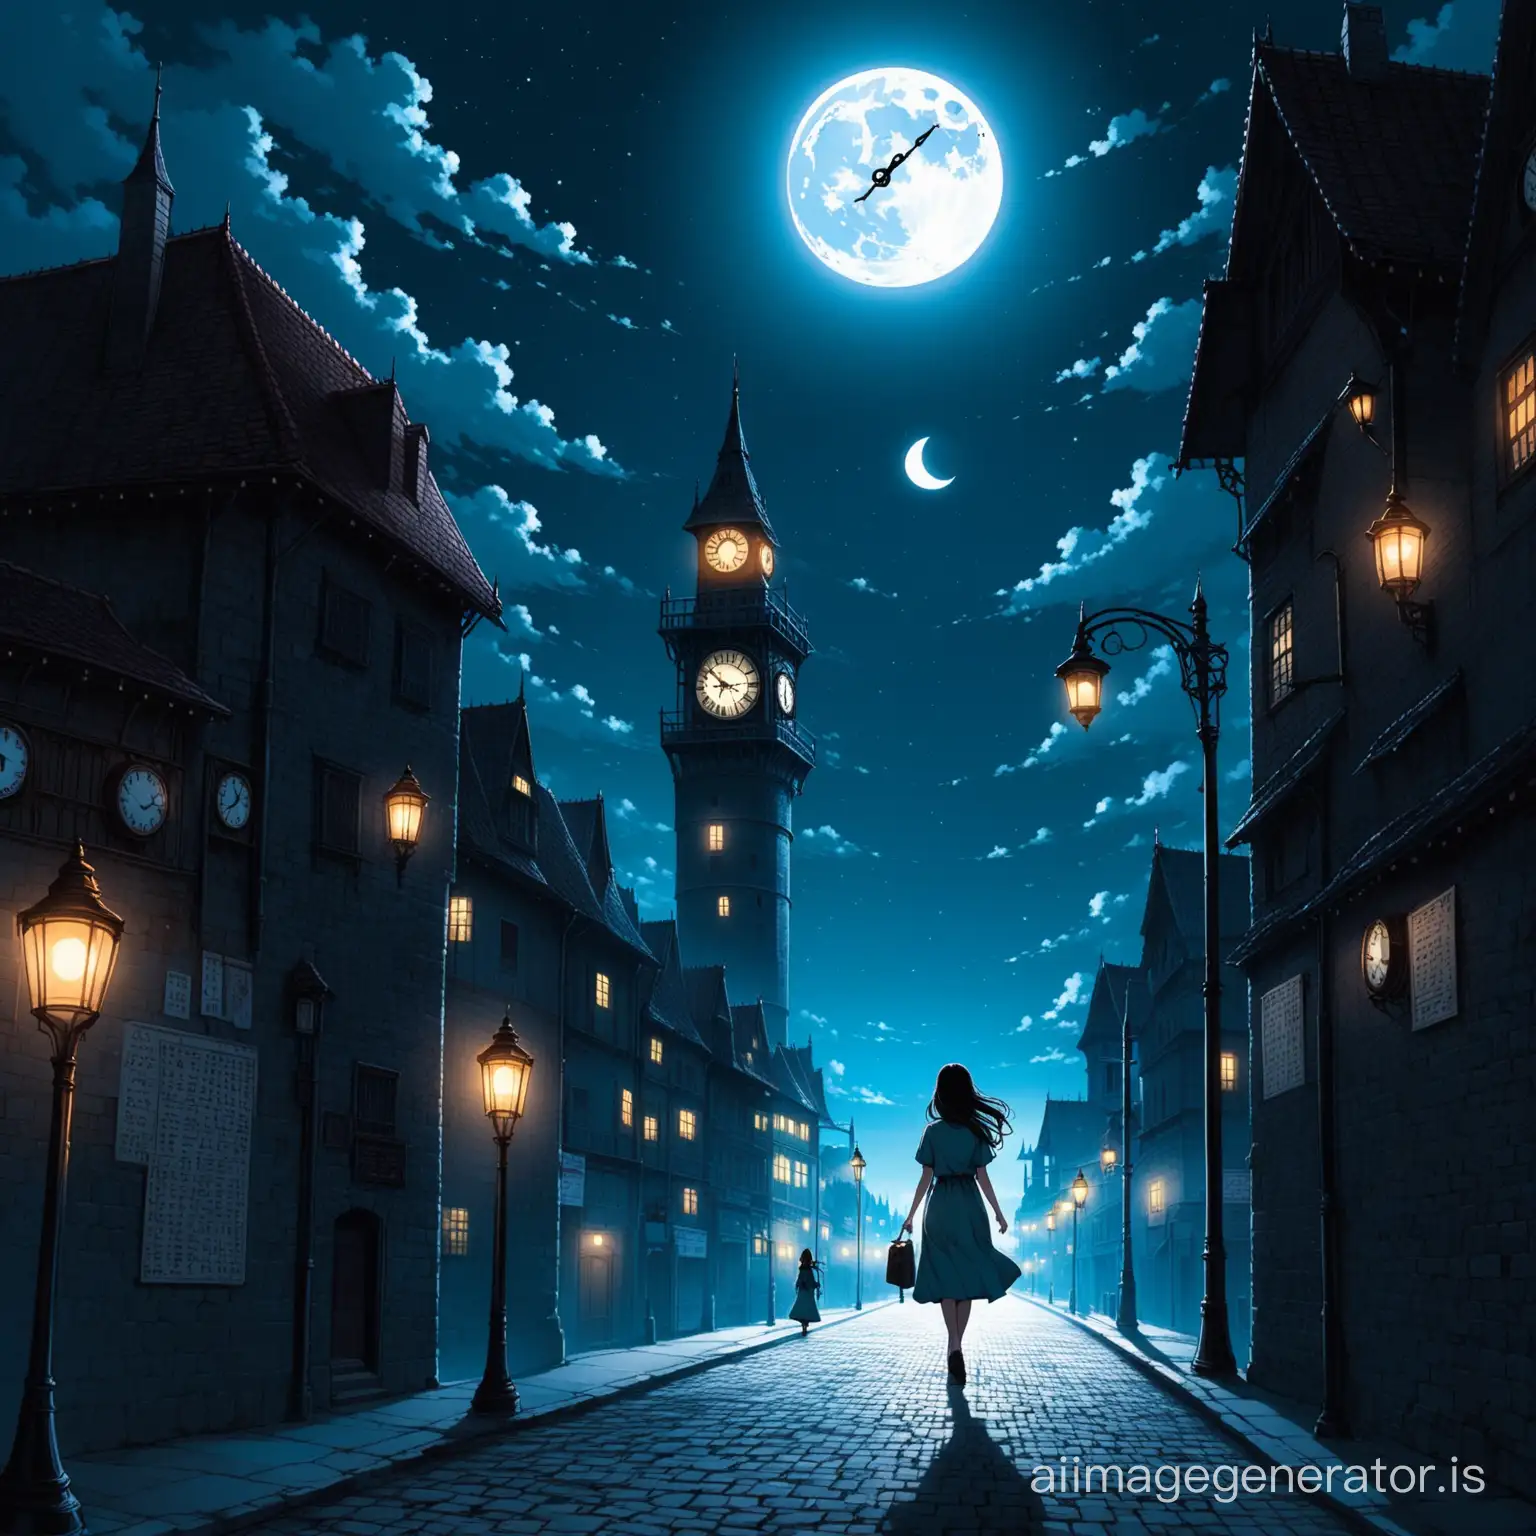 A woman sees her shadow, she walks at night under the full moon in the sky and next to it, a street lamp shines, and on the tower, there are clocks on which it is written 86.